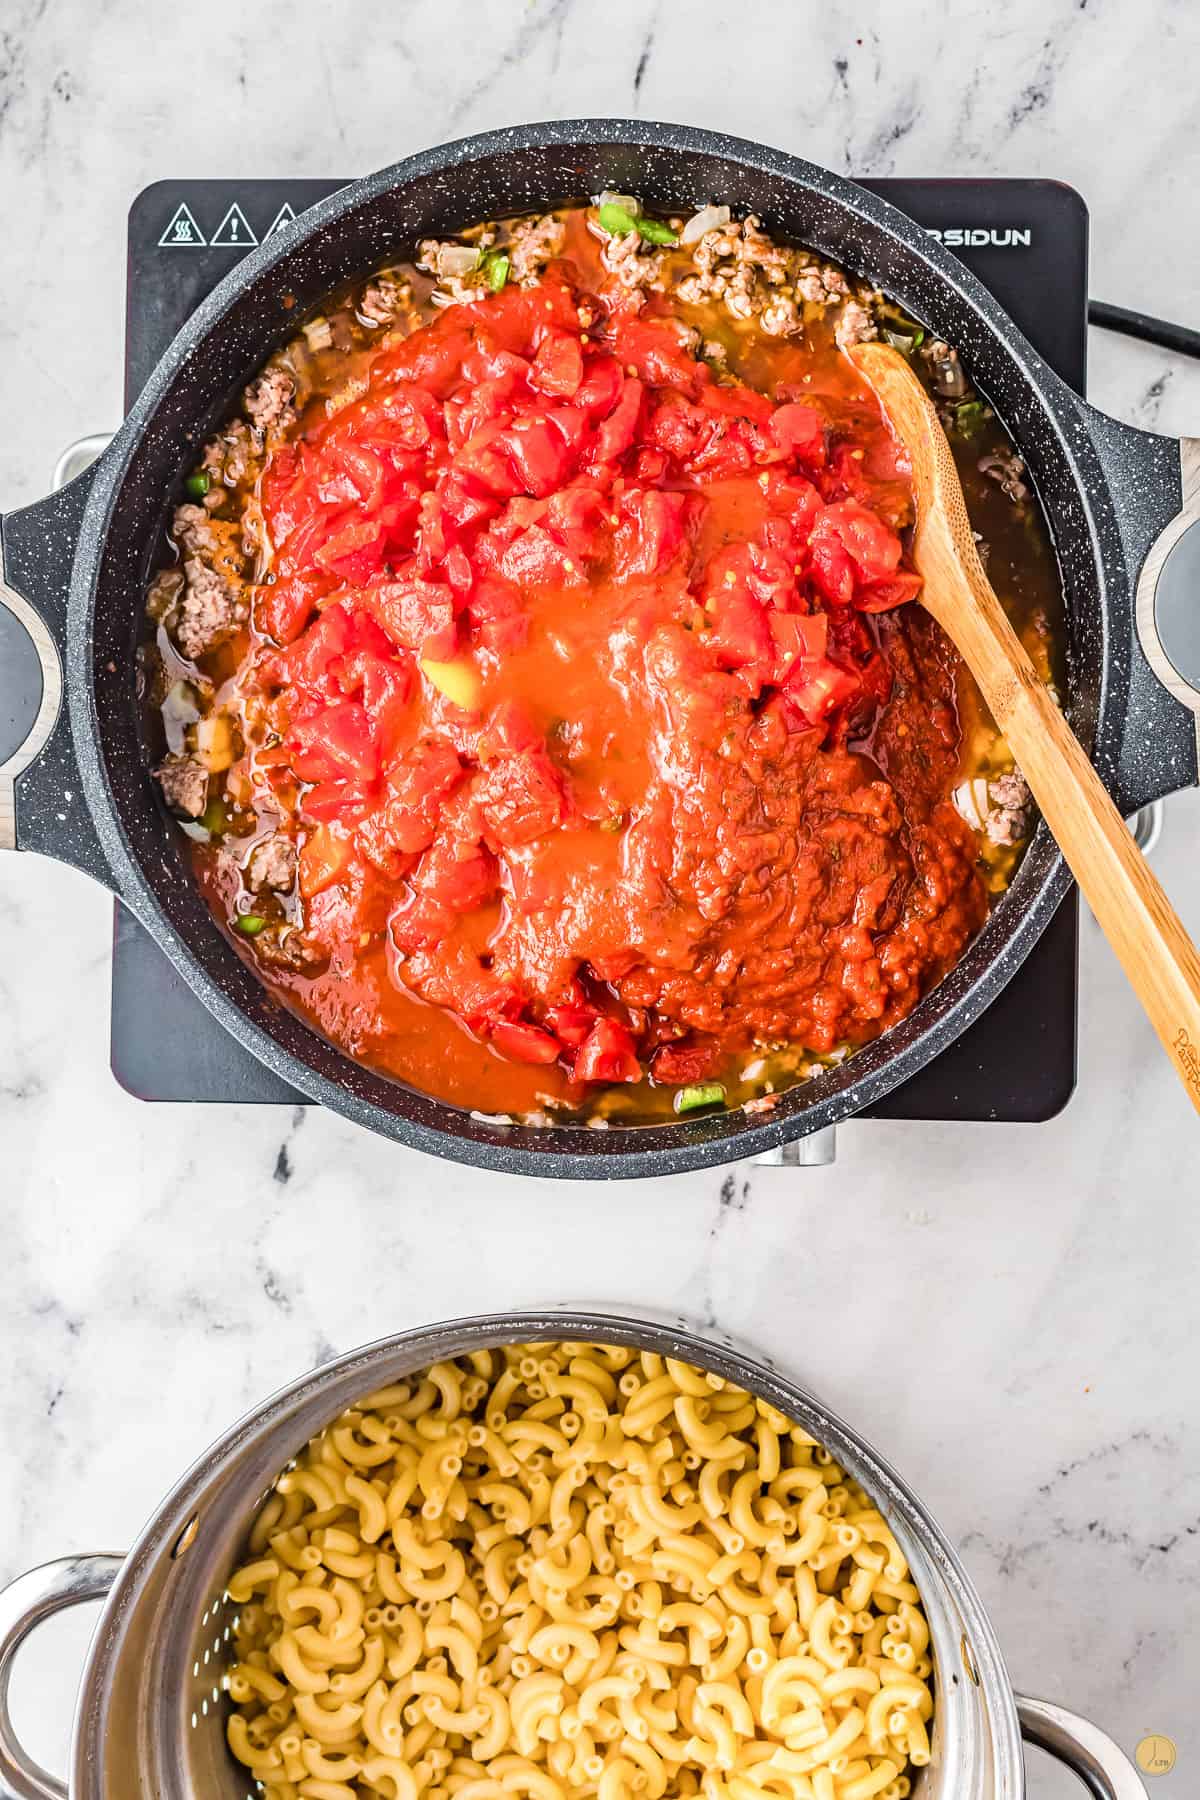 tomato-based sauce in a skillet